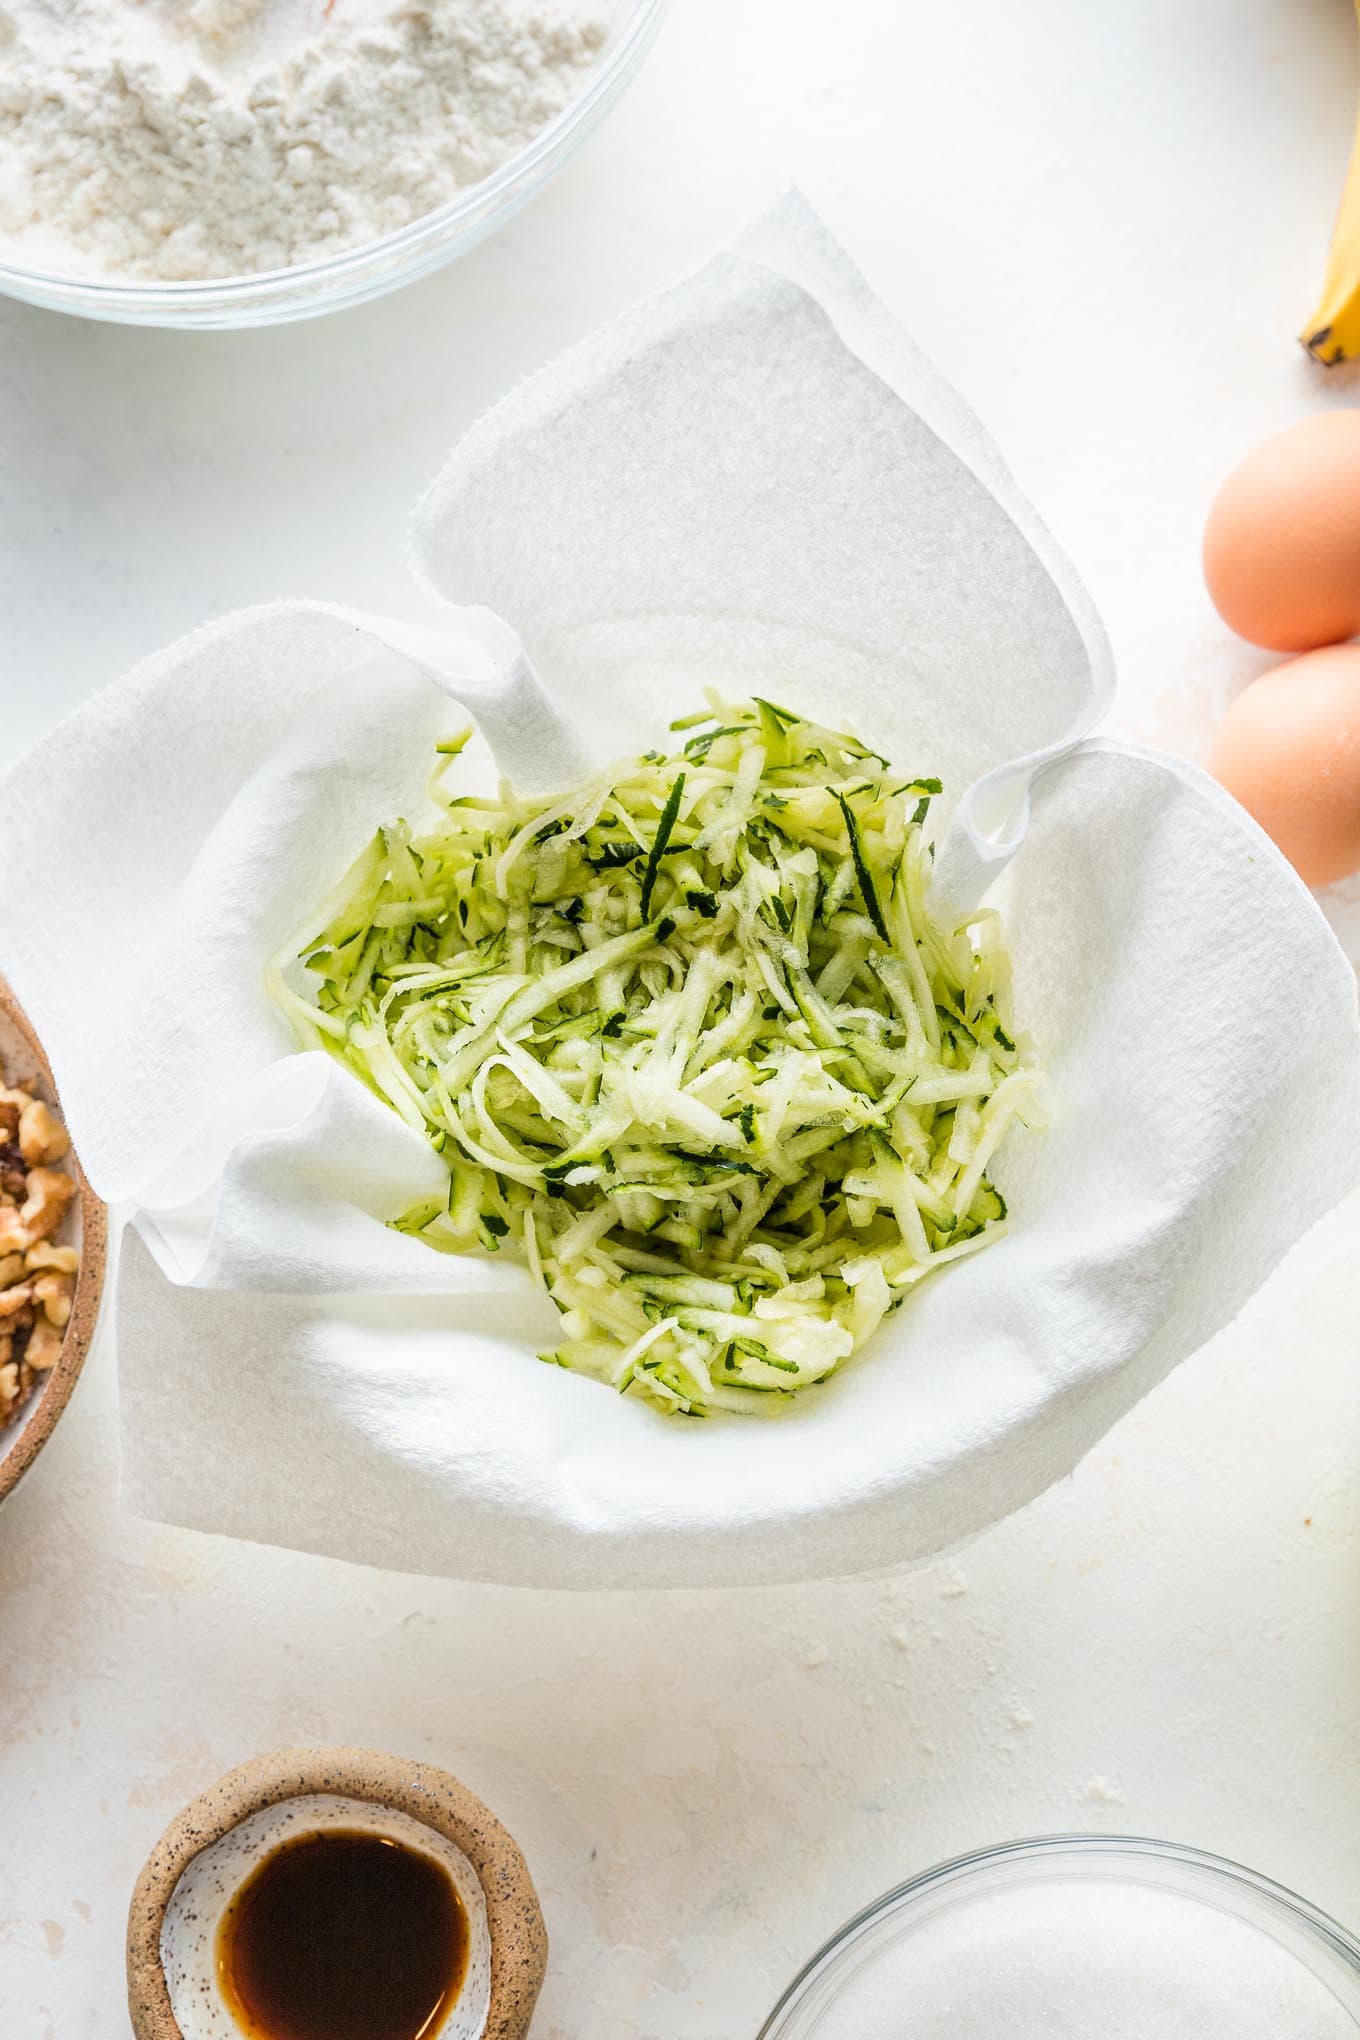 Shredded zucchini placed in a paper towel-lined bowl to dry slightly.